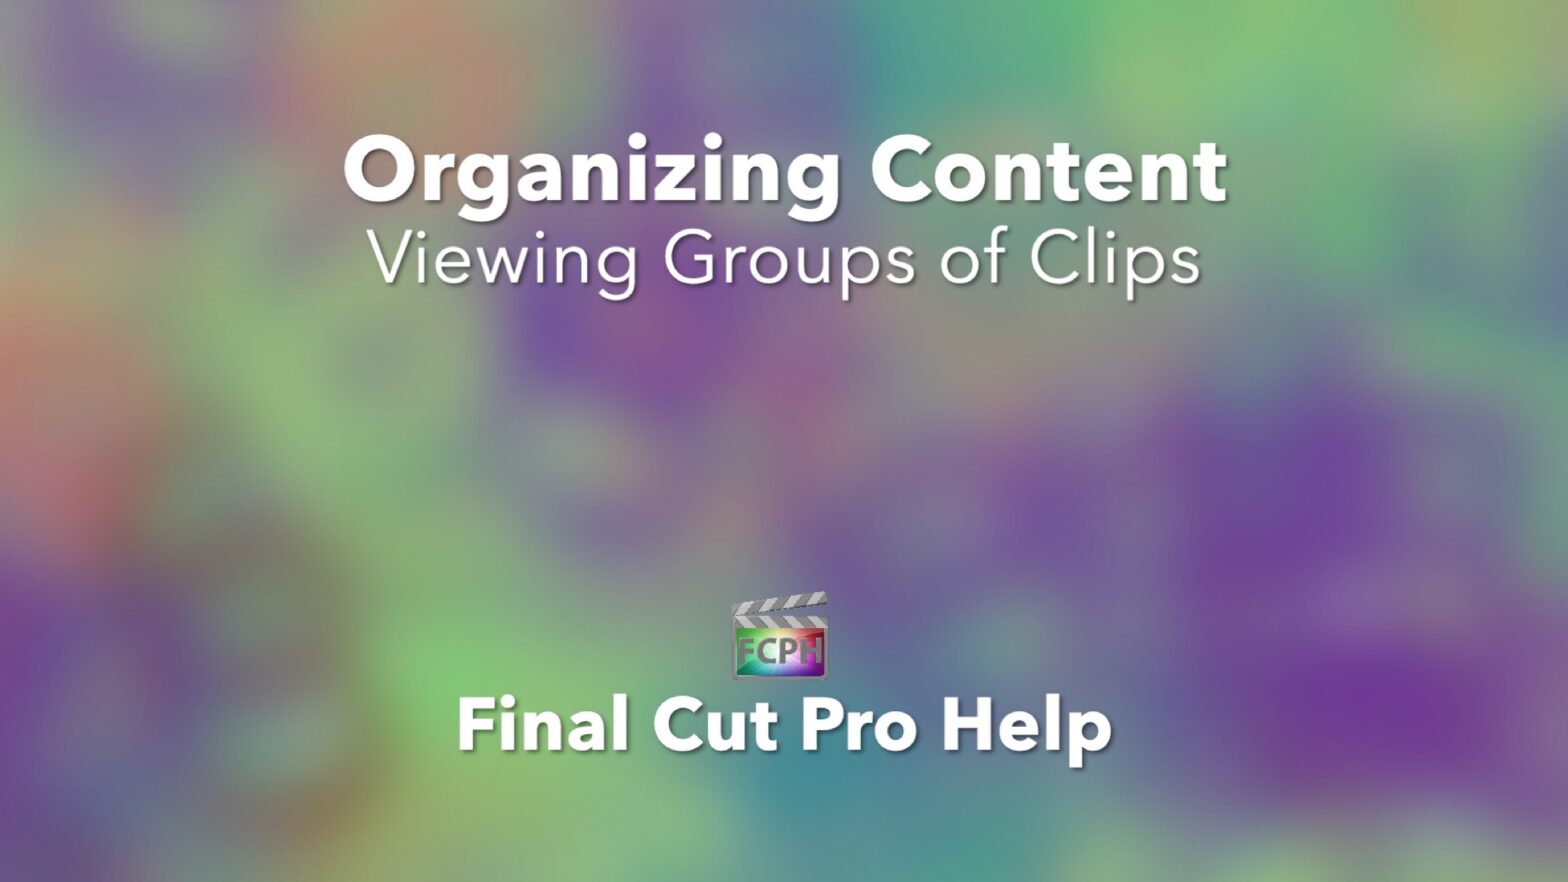 Viewing Groups of Clips